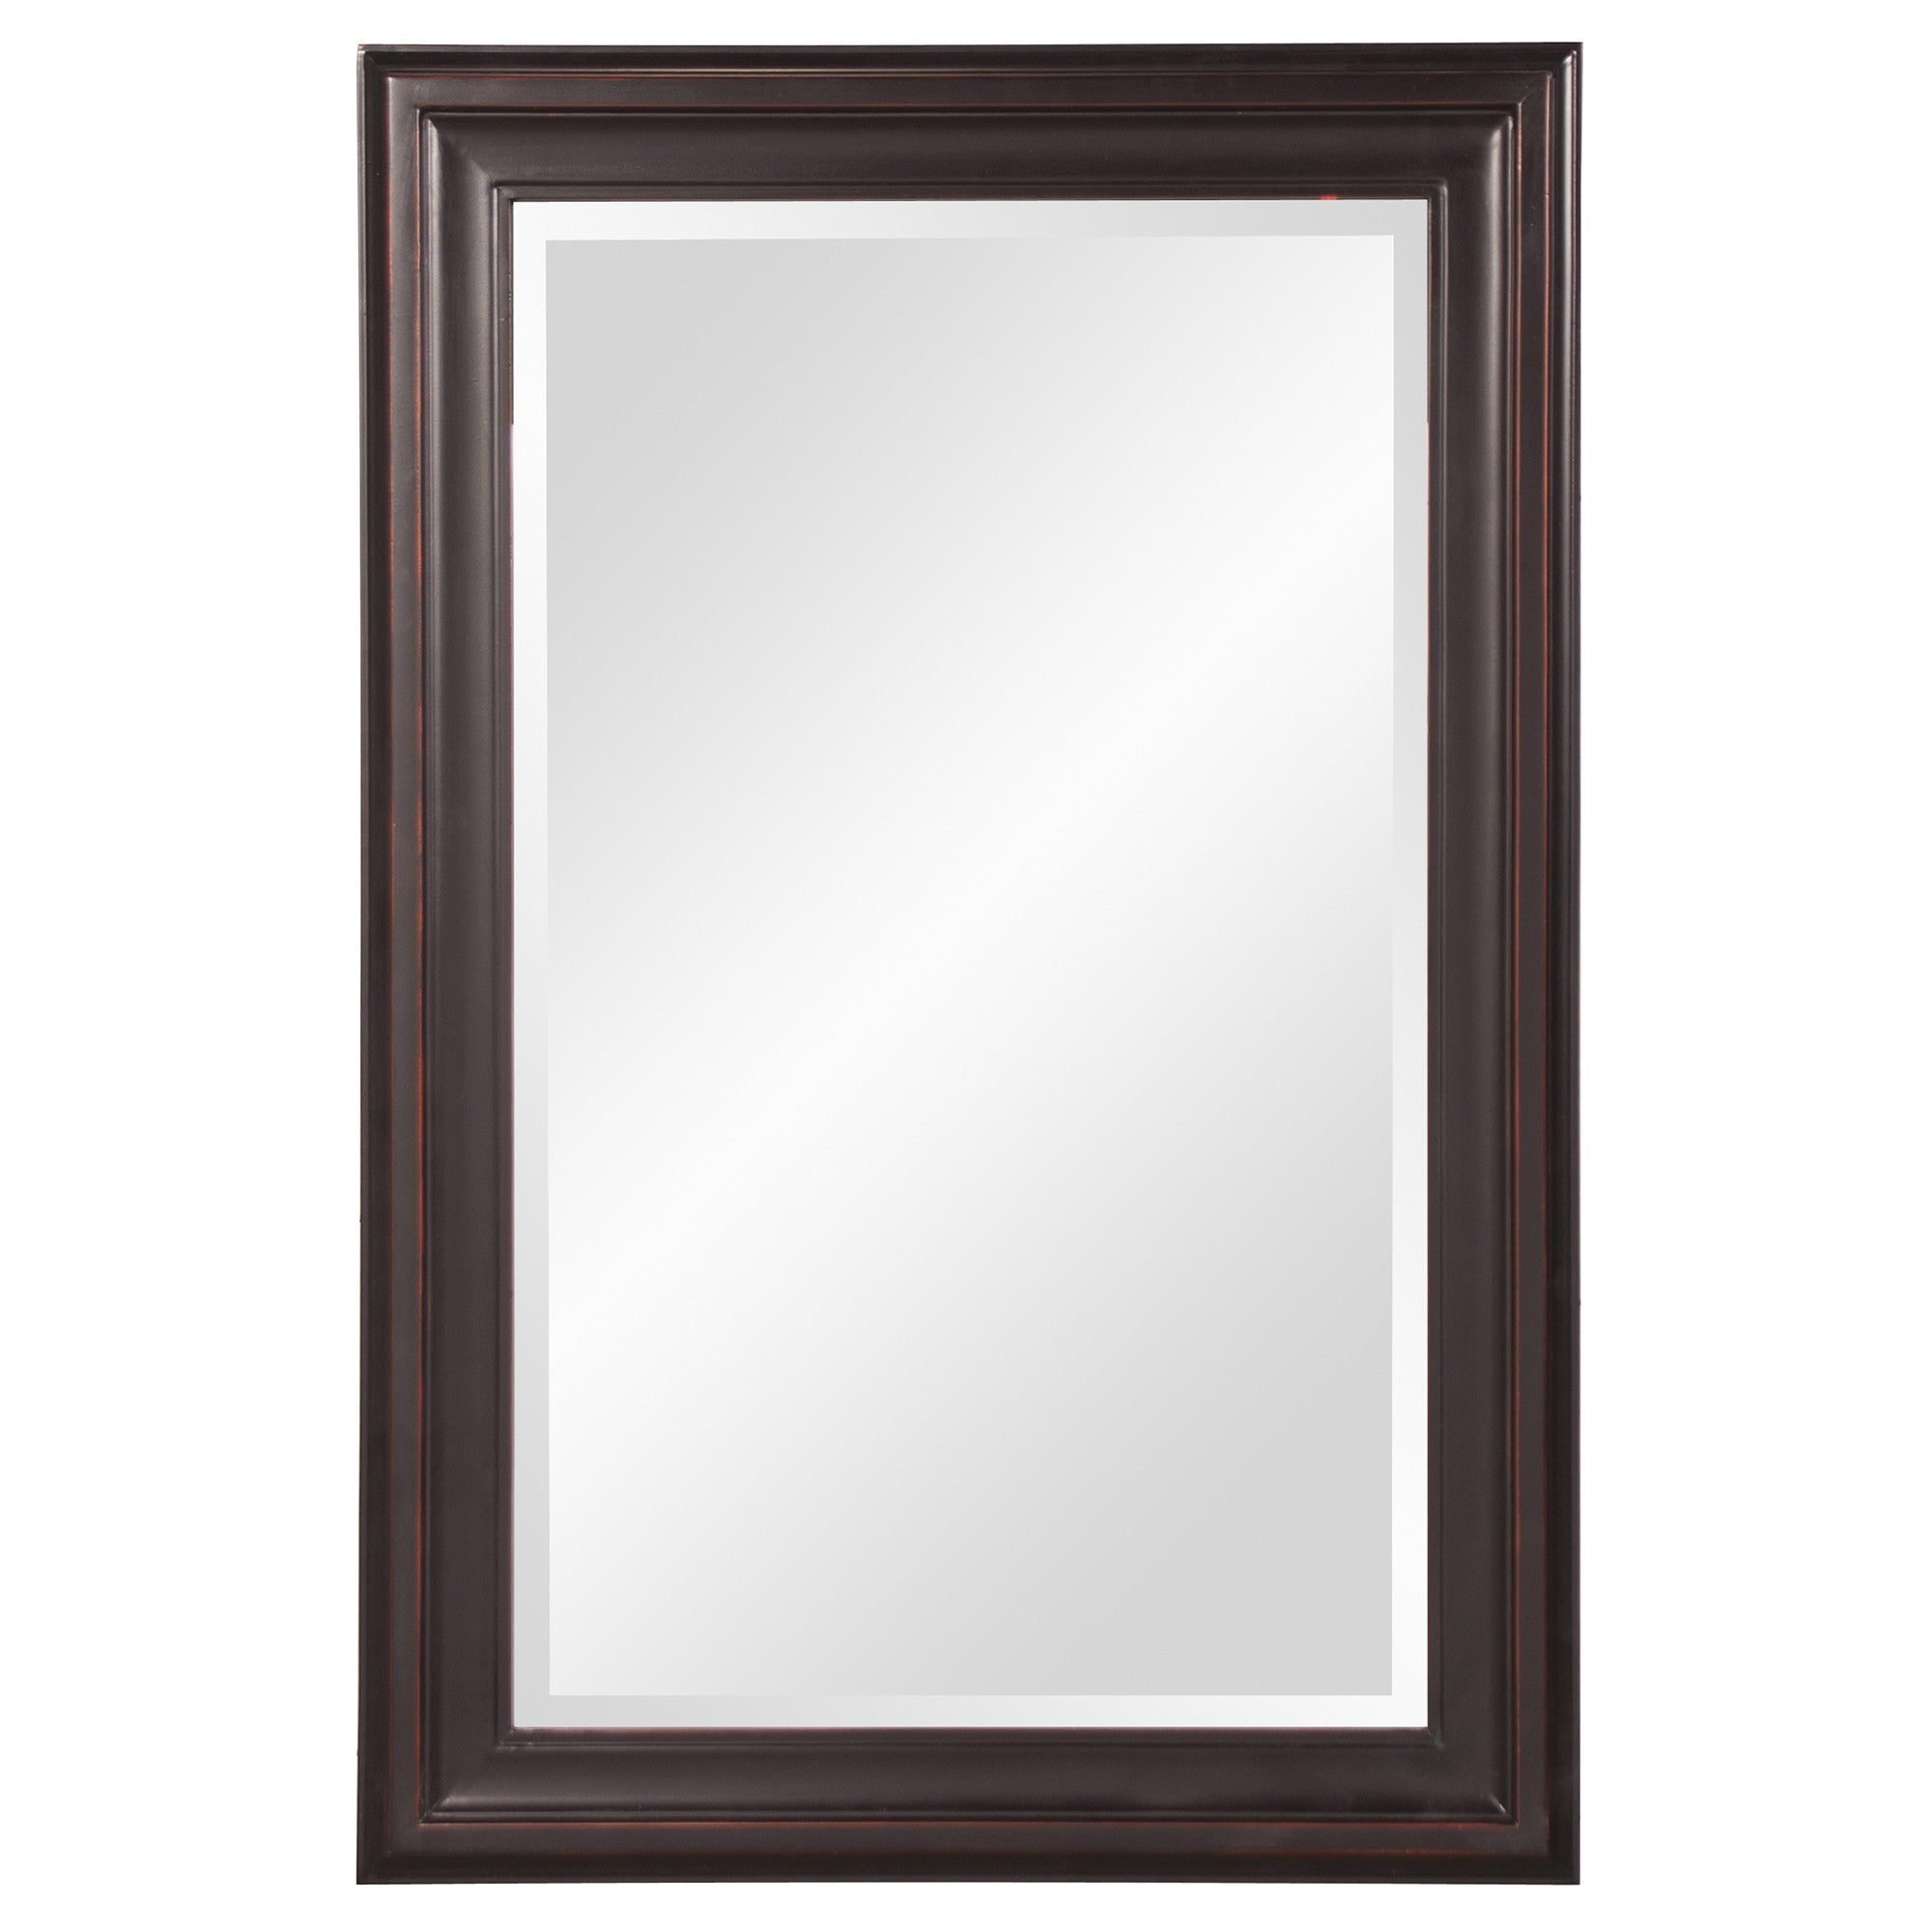 Rectangle Oil Rubbed Bronze Finish Mirror With Wooden Bronze Frame